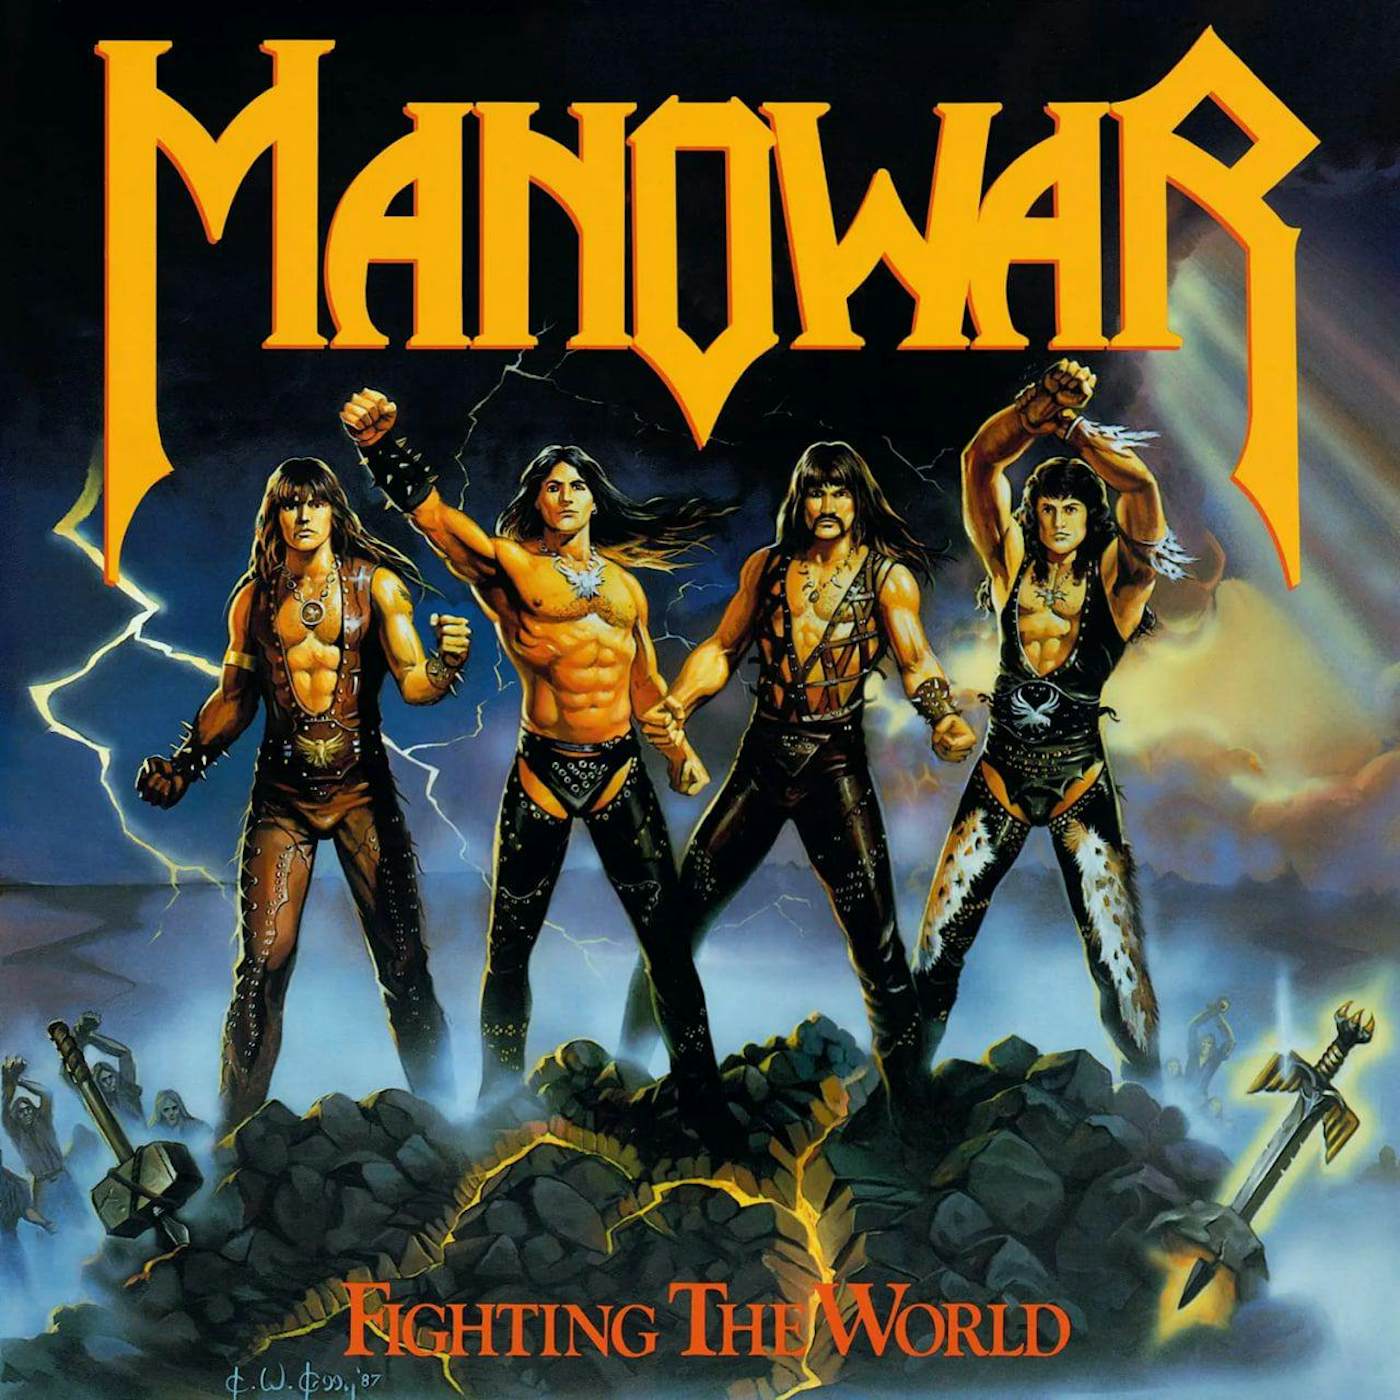 Manowar FIGHTING THE WORLD (LIMITED/YELLOW FLAMED VINY/180G) Vinyl Record